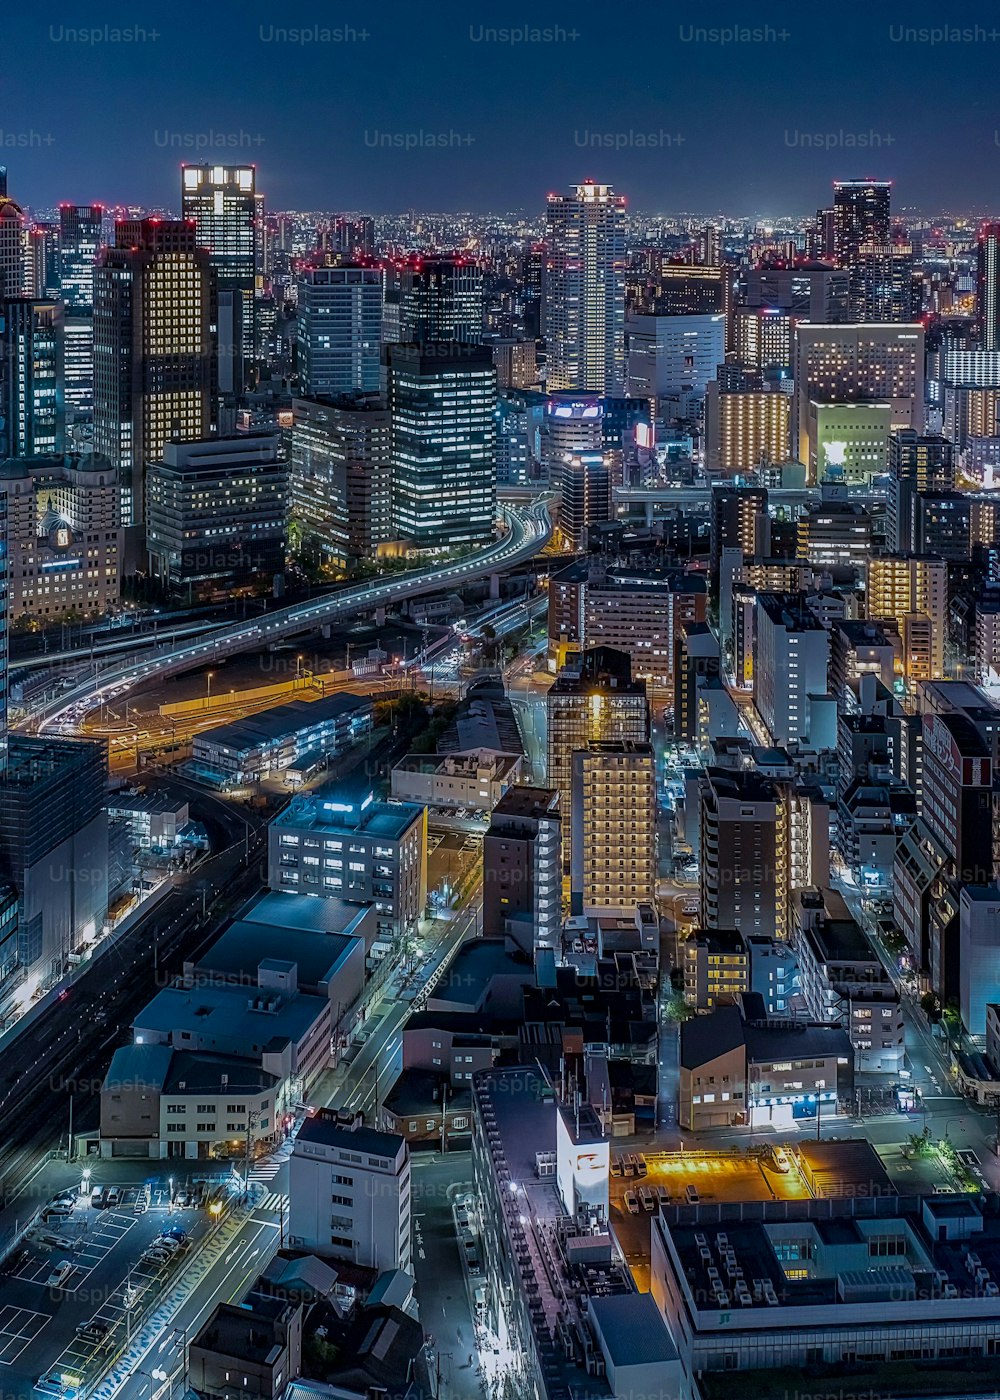 An aerial view of a bustling cityscape with tall skyscrapers at night in Tokyo, Japan